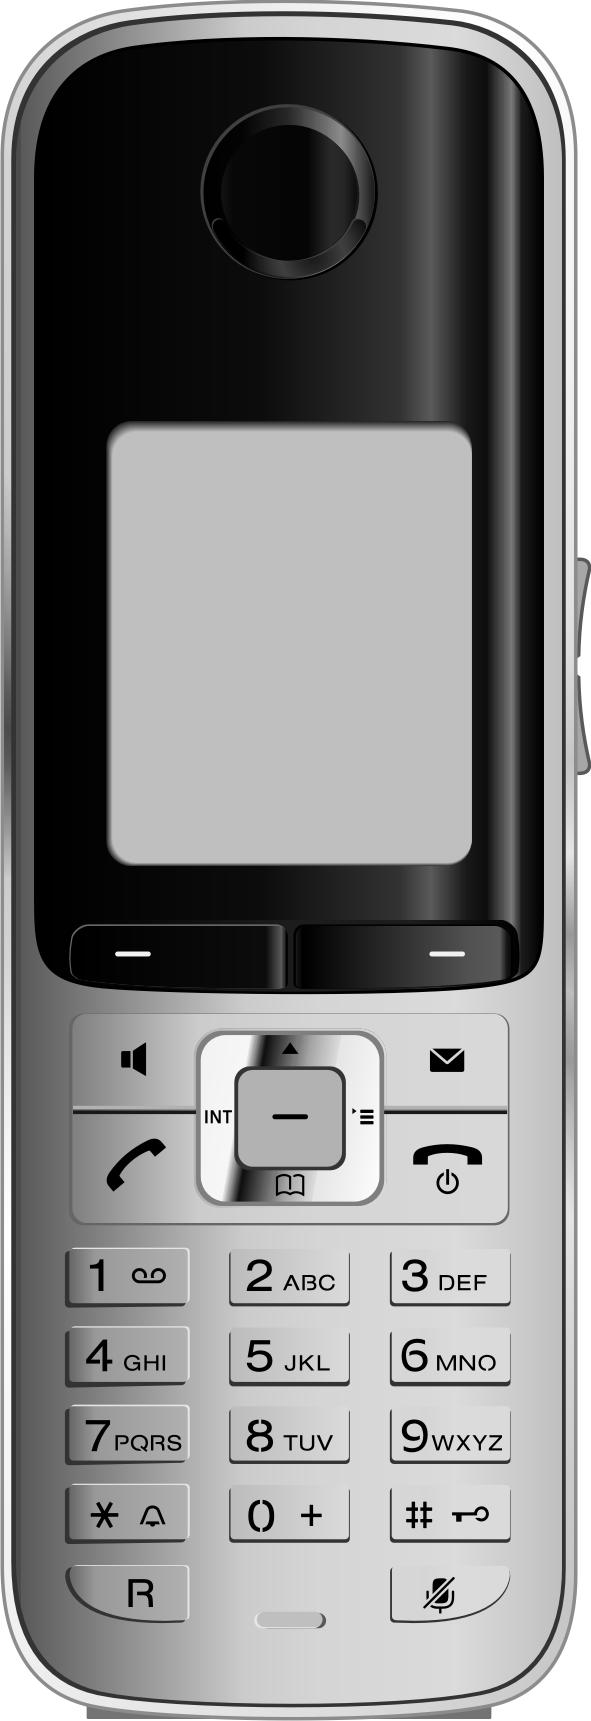 The handset at a glance The handset at a glance 18 17 INT 1 Calls 16 15 14 13 12 11 10 9 i Ã V 07:15 1 2 14 Oct 3 SMS 4 5 6 7 8 1 Display in idle status 2 Battery charge status ( page 17) 3 Side keys